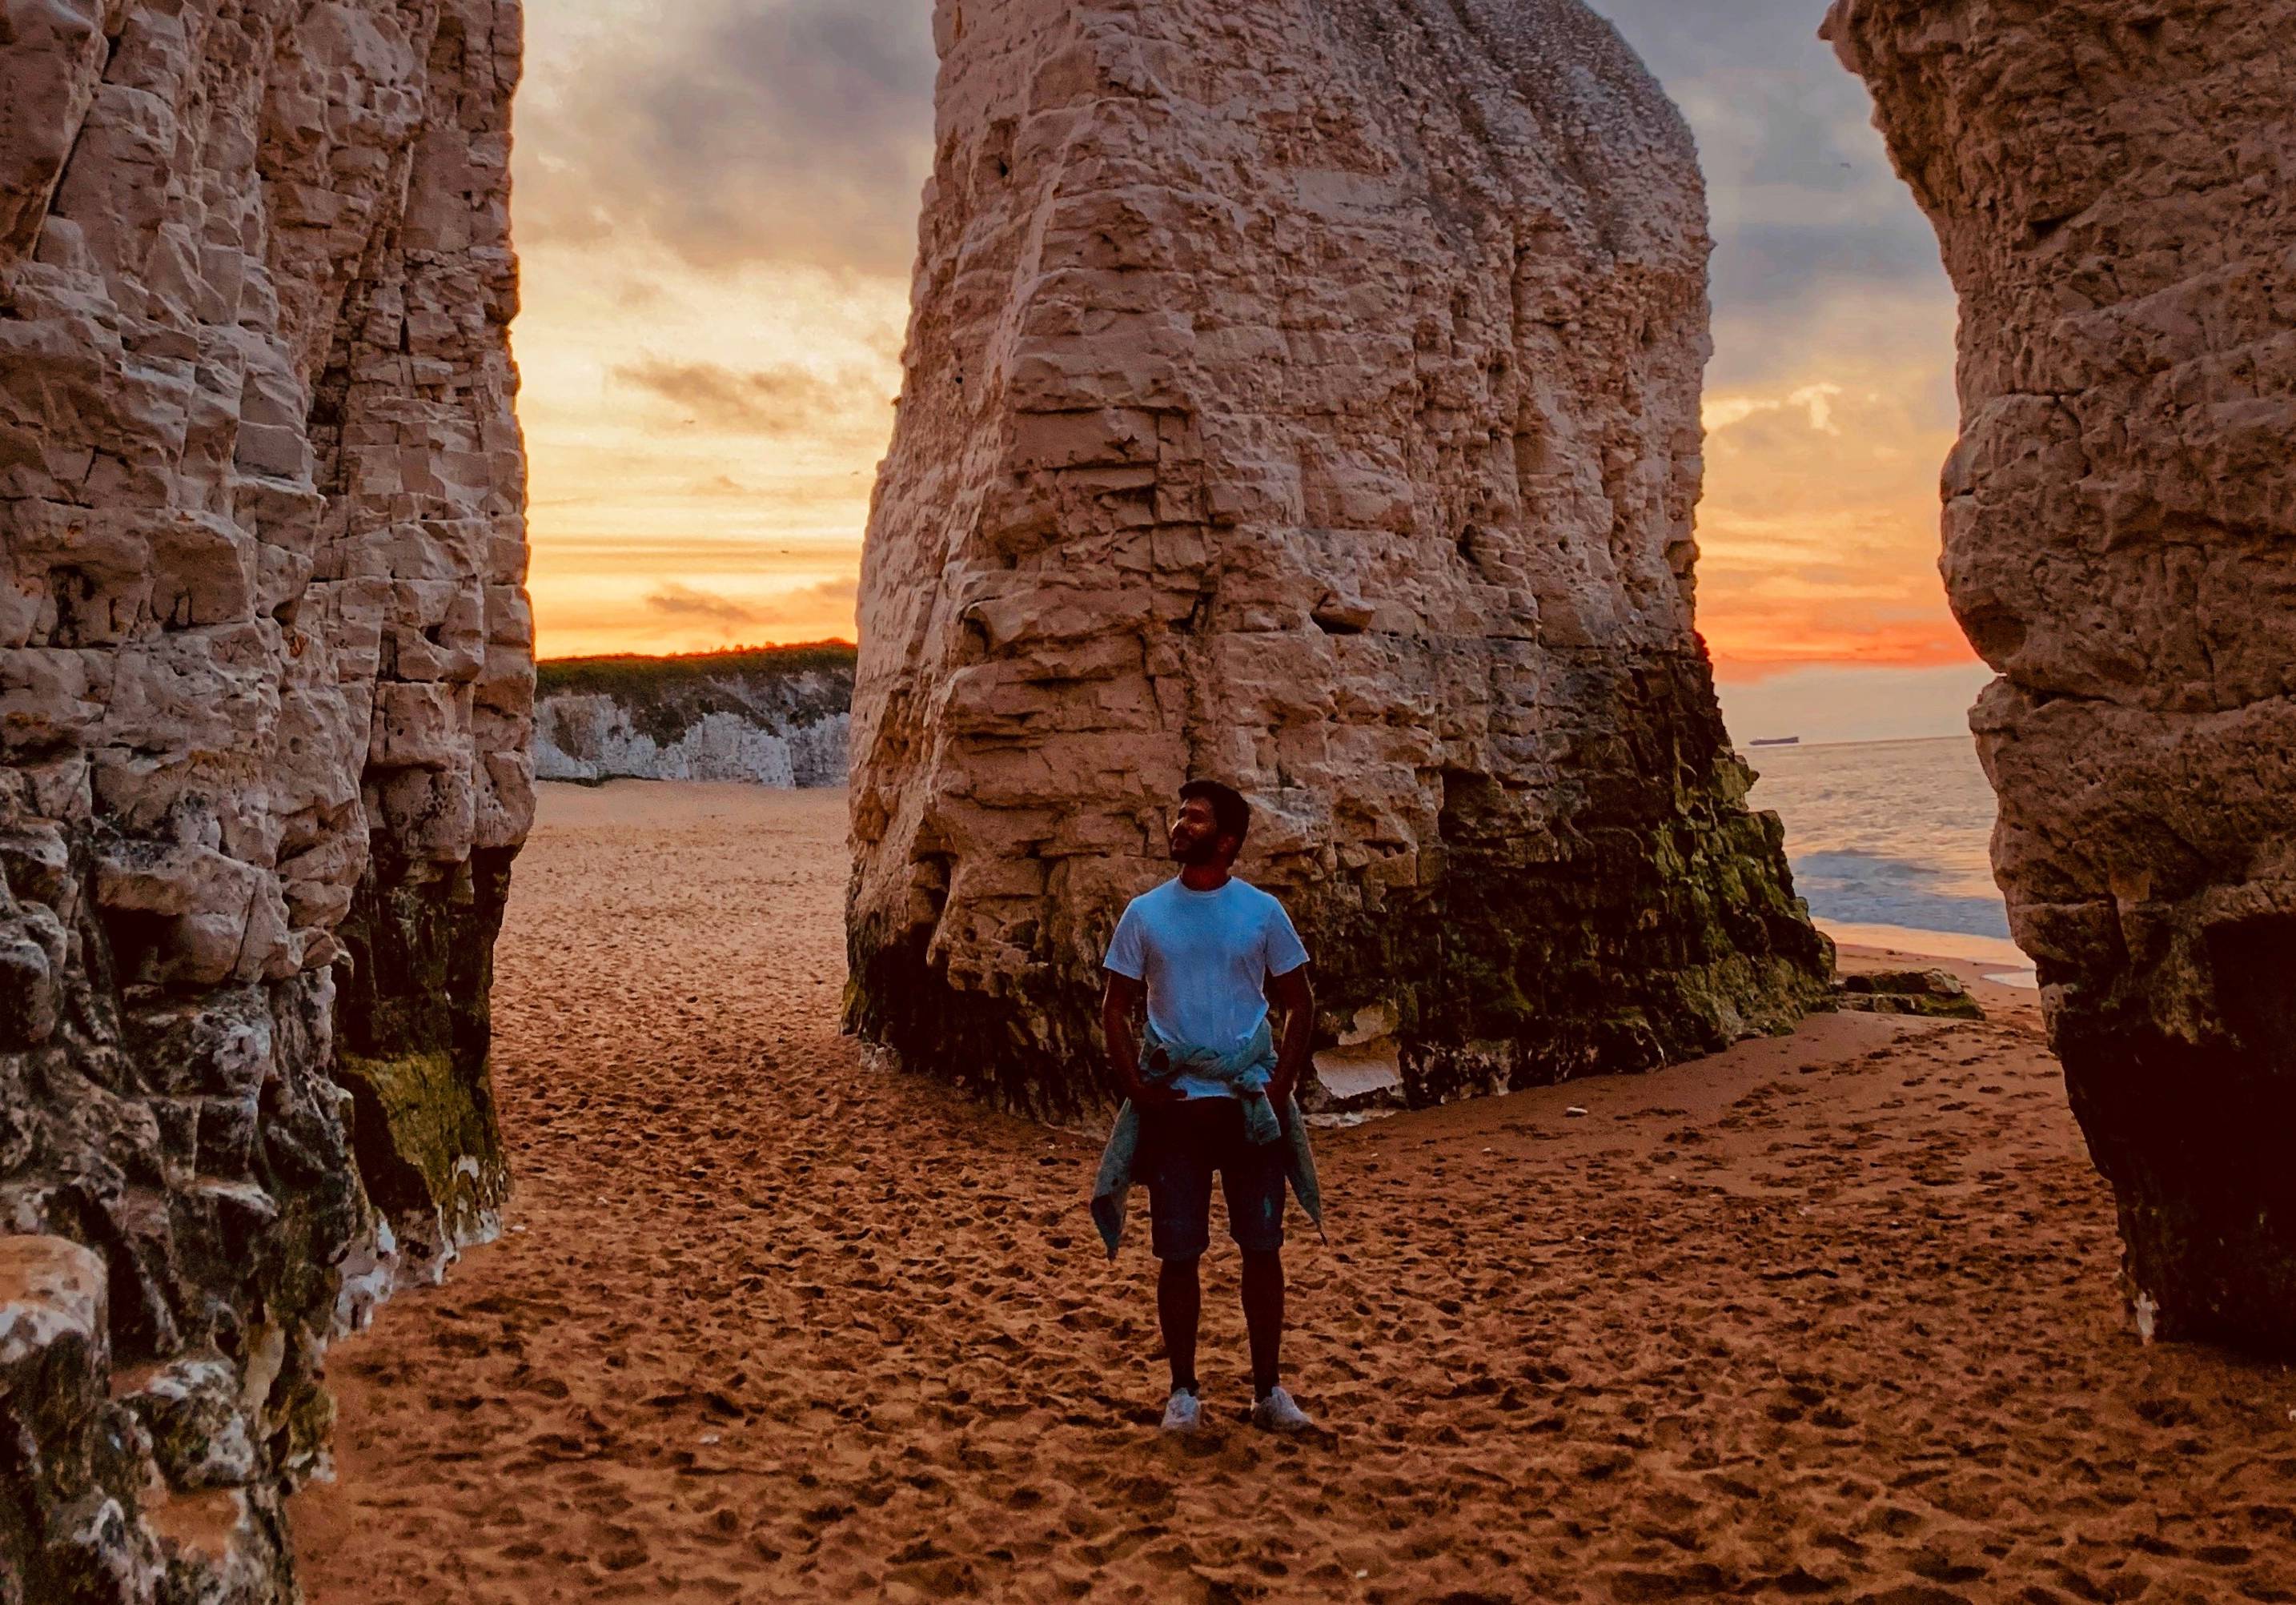 Man stands between two sandstone formations on a beach at sunset